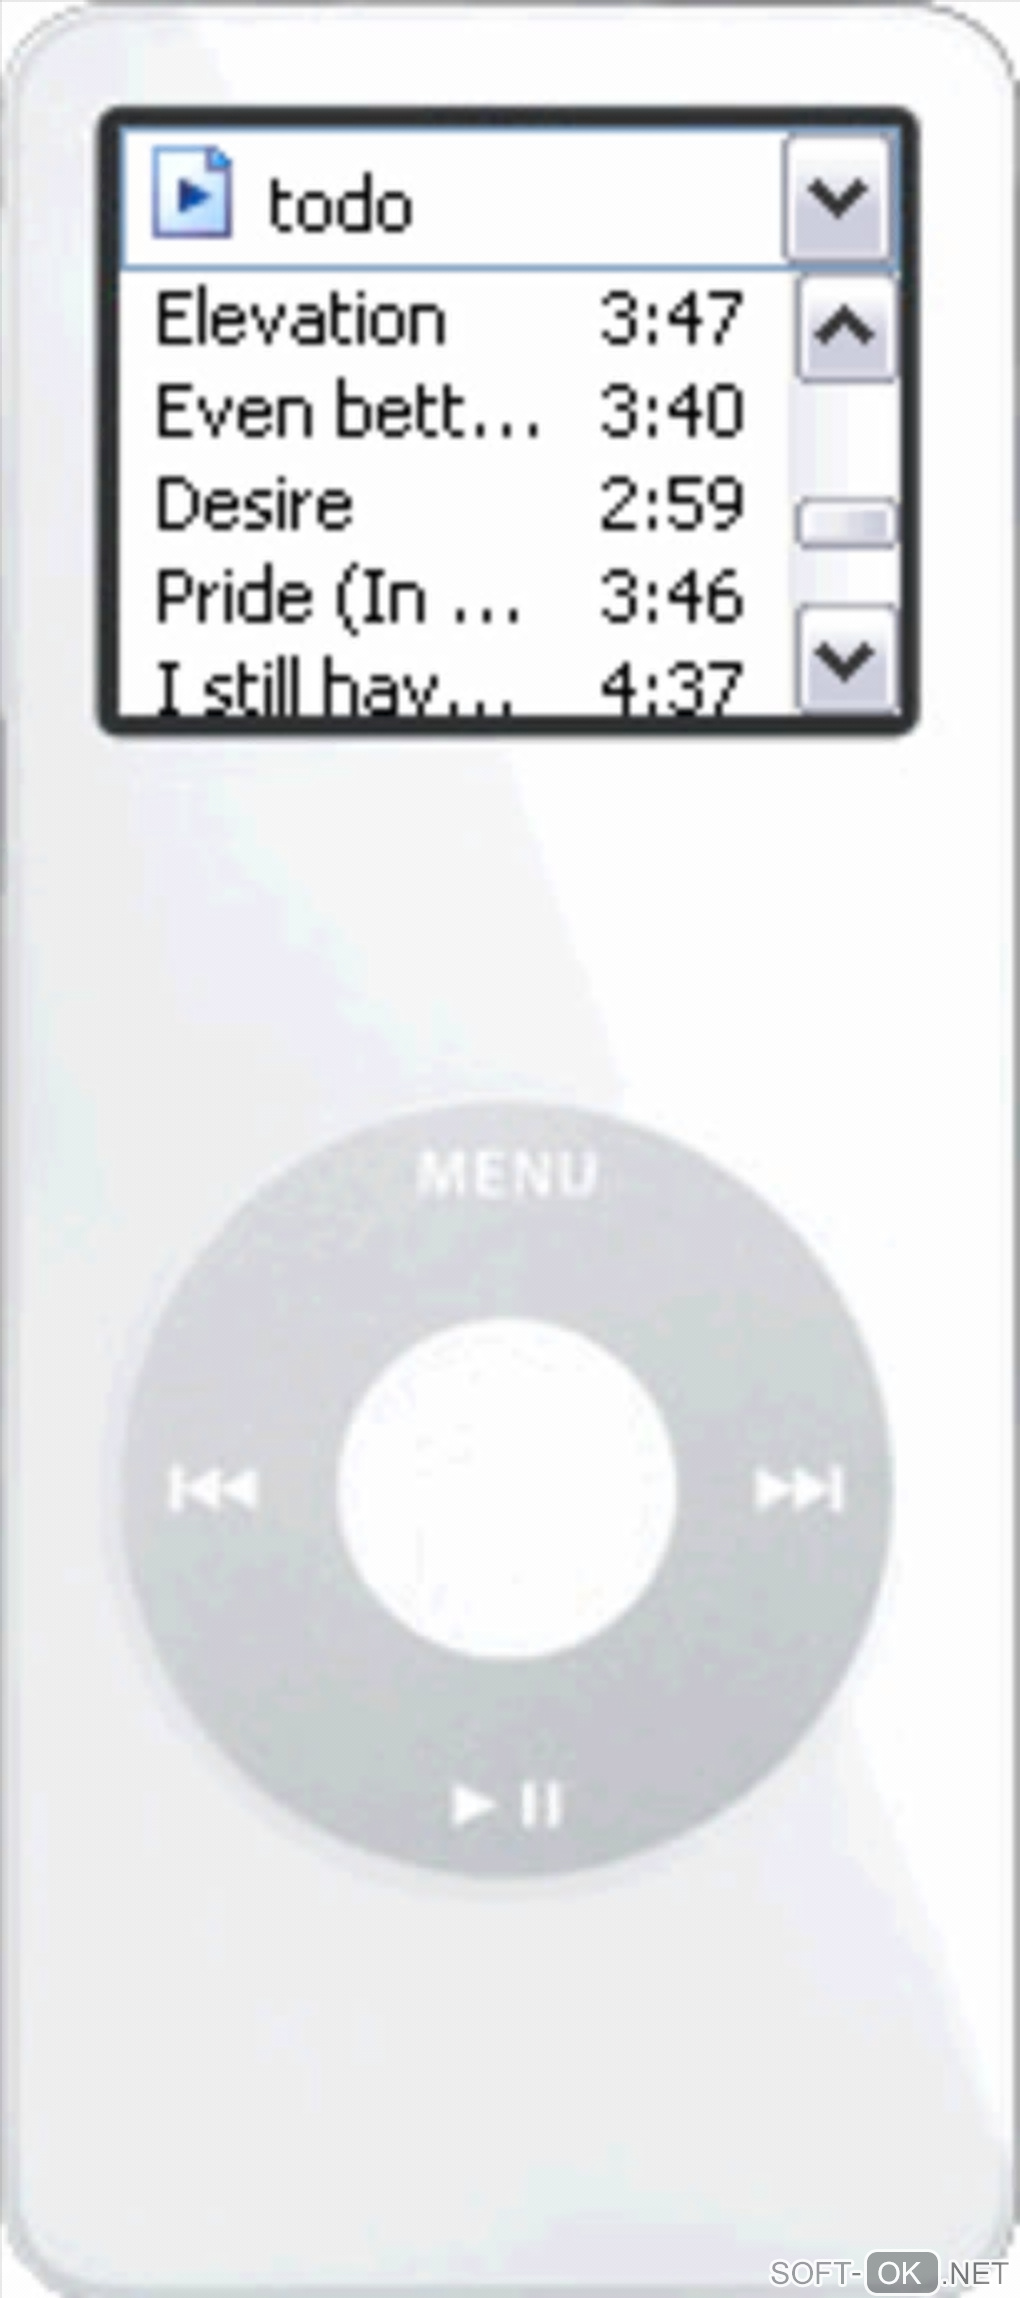 The appearance "iPod Theme for Windows Media Player"